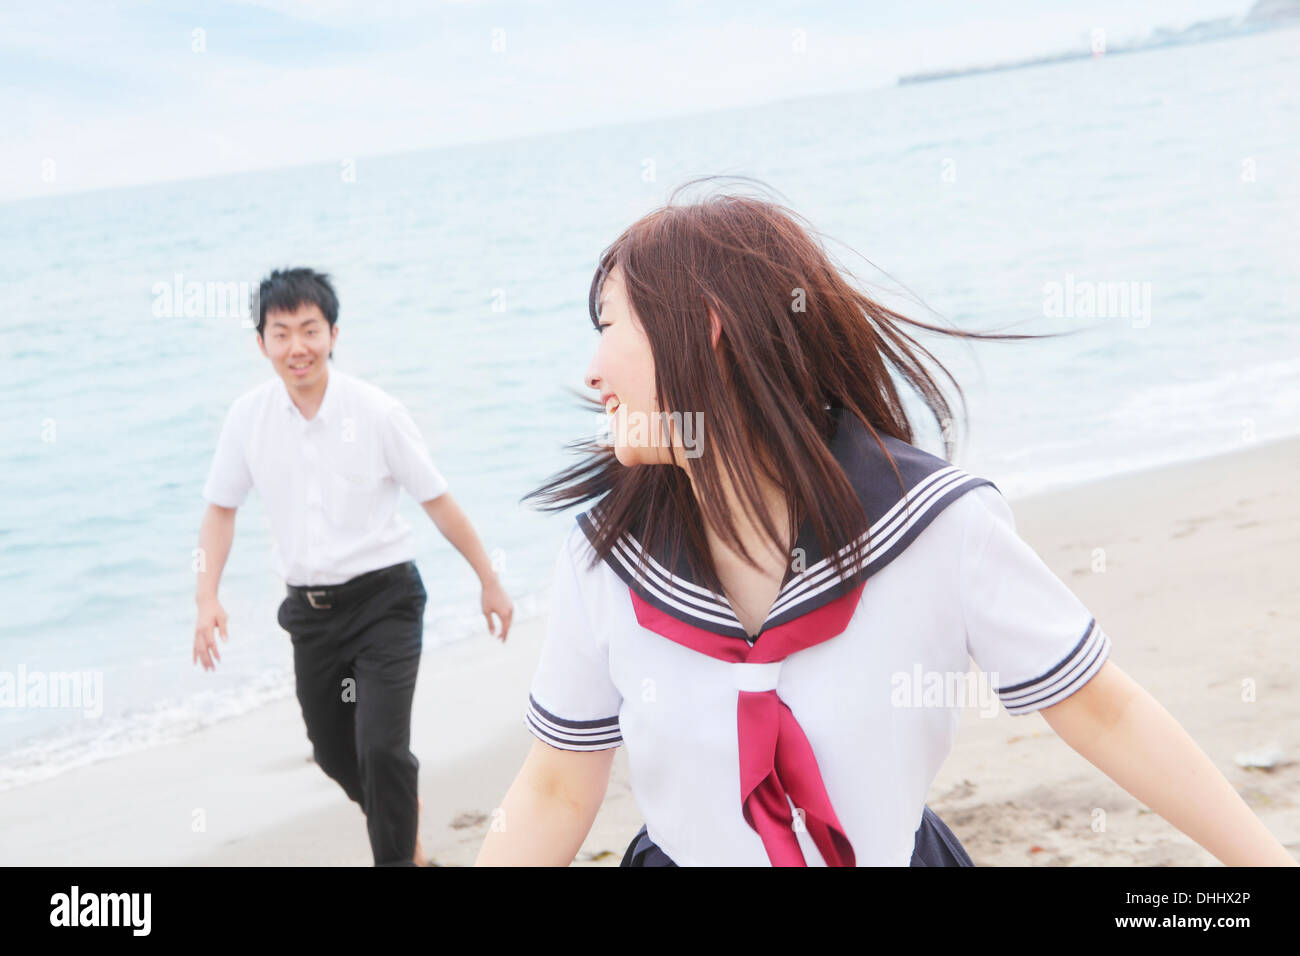 Young couple wearing school uniform running on beach Banque D'Images